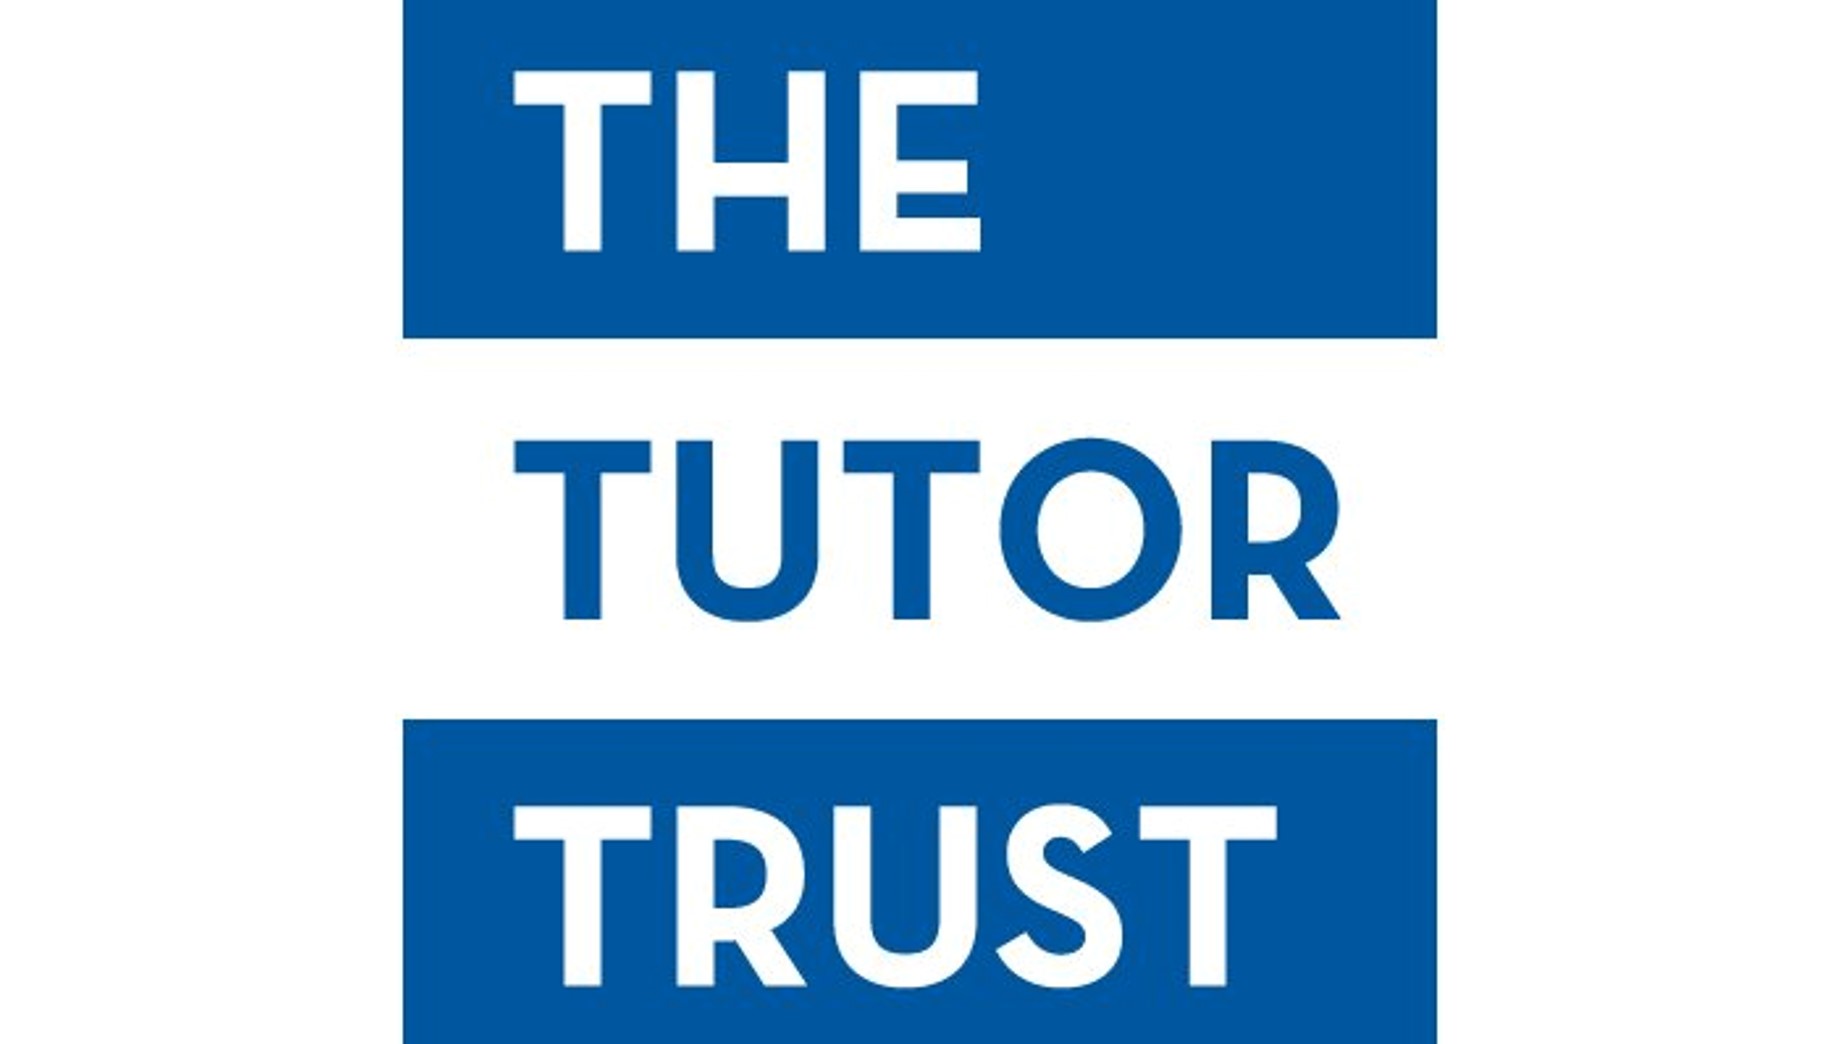 JCP in Manchester on Twitter: "The Tutor Trust is hiring for a full time Administration Assistant based in central Manchester See: https://t.co/agWSSAHvPb @TheTutorTrust #AdminJobs #ManchesterJobs https://t.co/w9ByQum16o" / Twitter